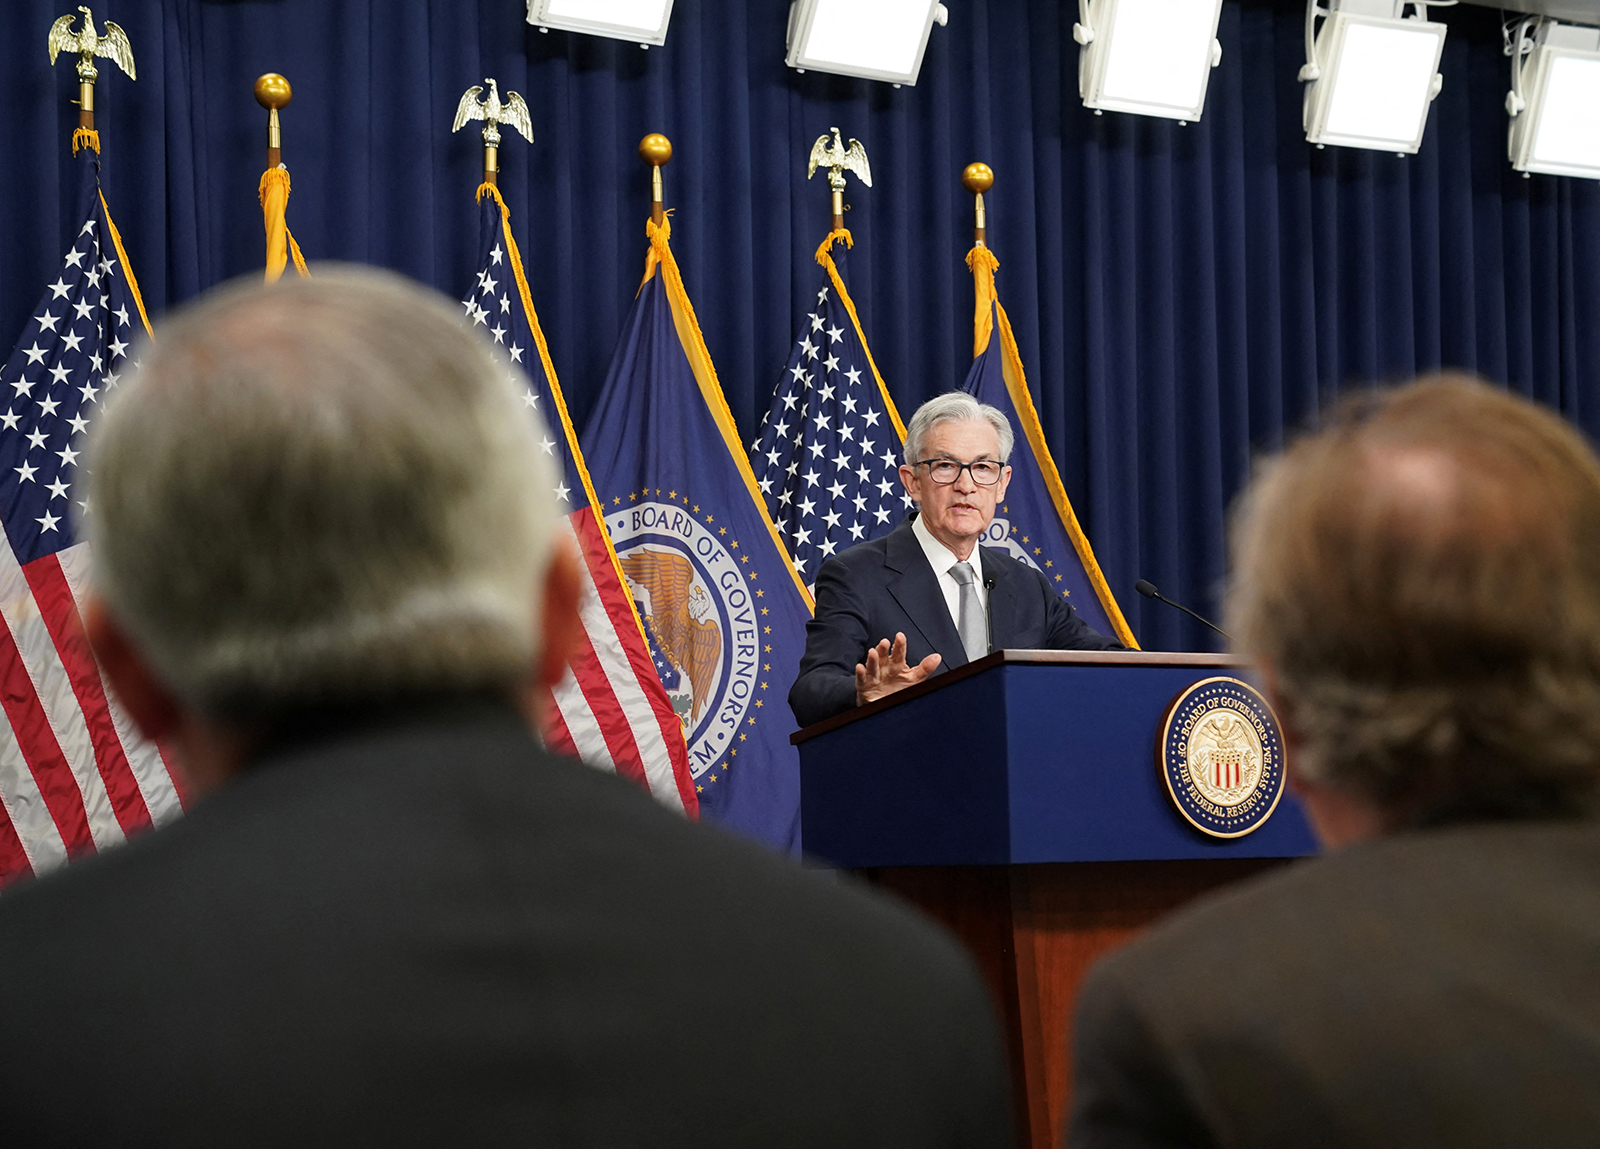 Federal Reserve Board Chairman Jerome Powell answers a question at a press conference following a closed two-day meeting of the Federal Open Market Committee on interest rate policy at the Federal Reserve in Washington, today.